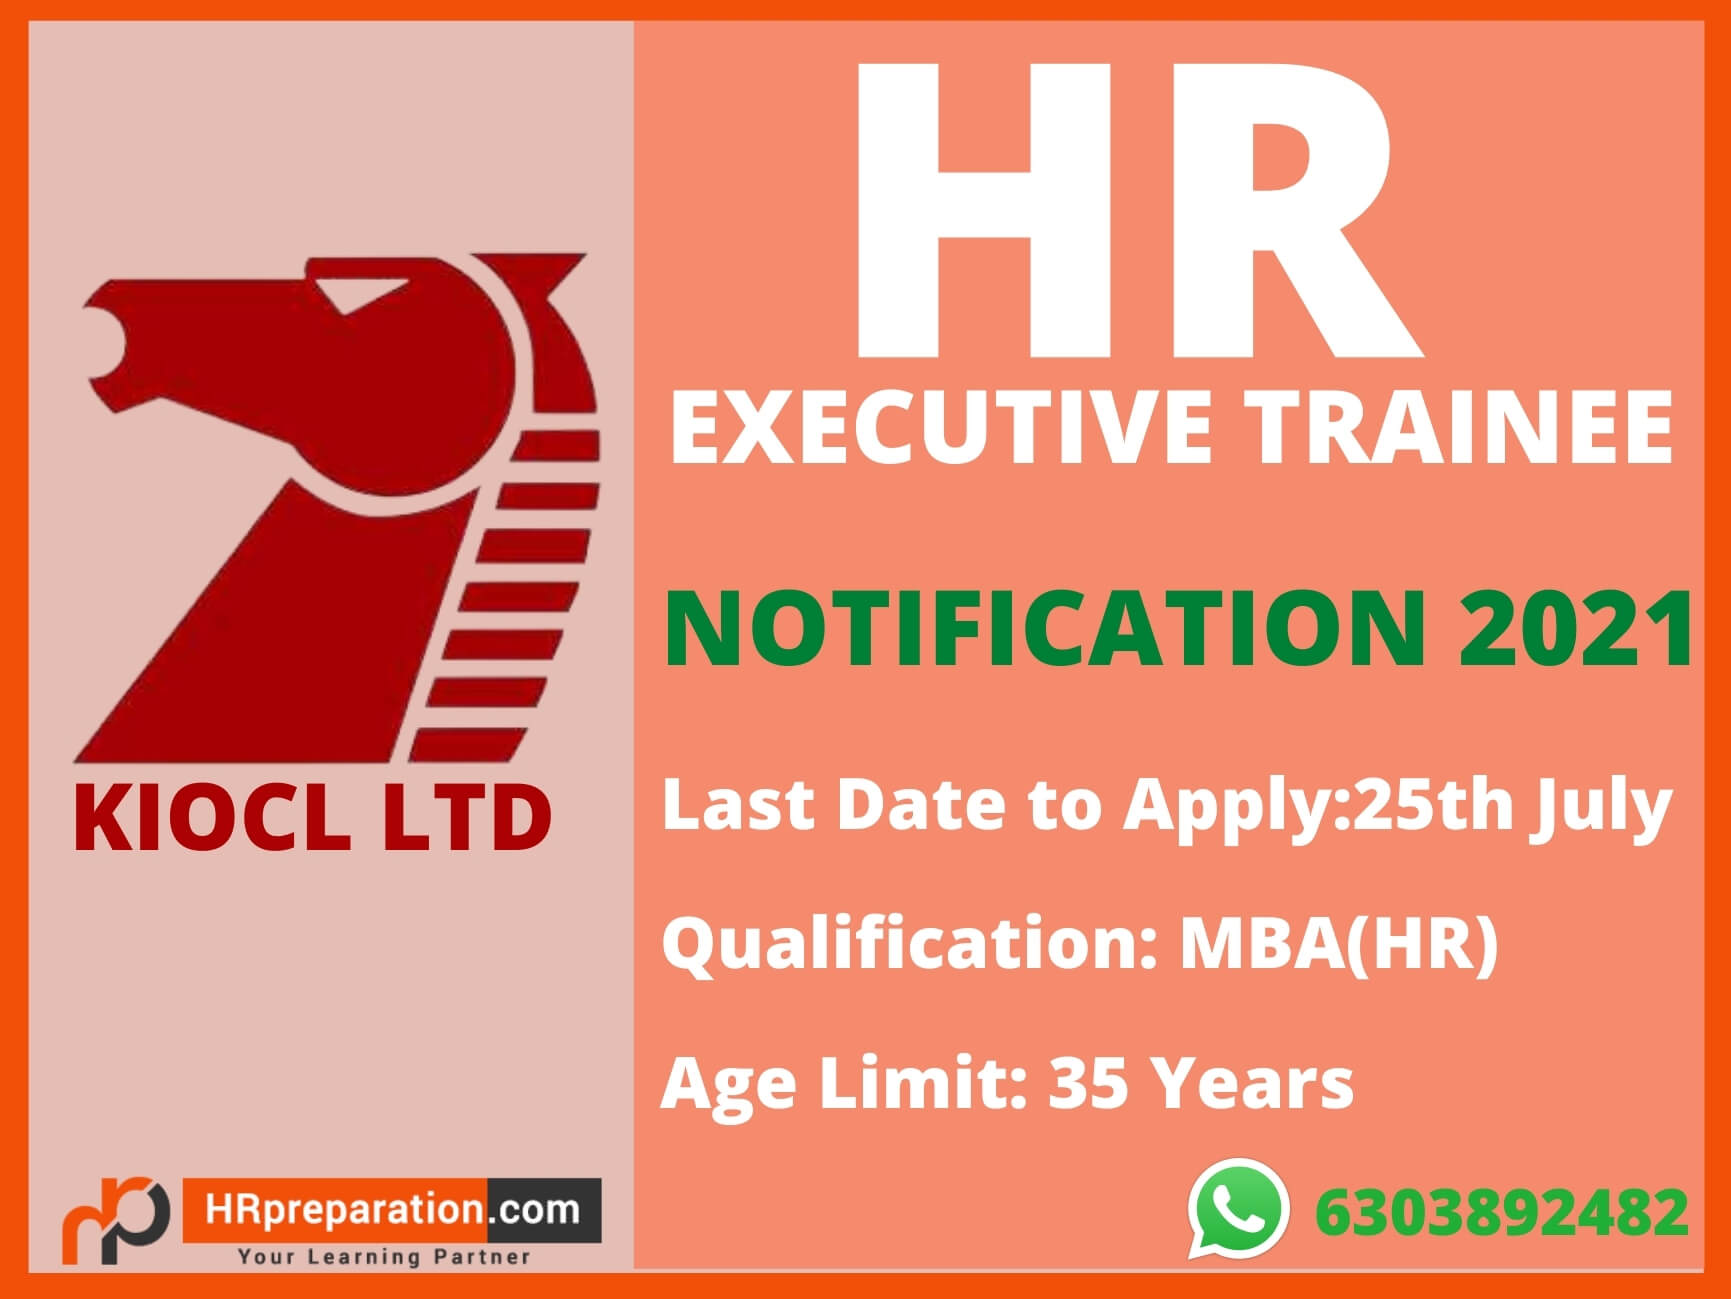 KIOCL HR Executive Trainee Notification 2021 out ,KIOCL HR Recruitment Notification apply now